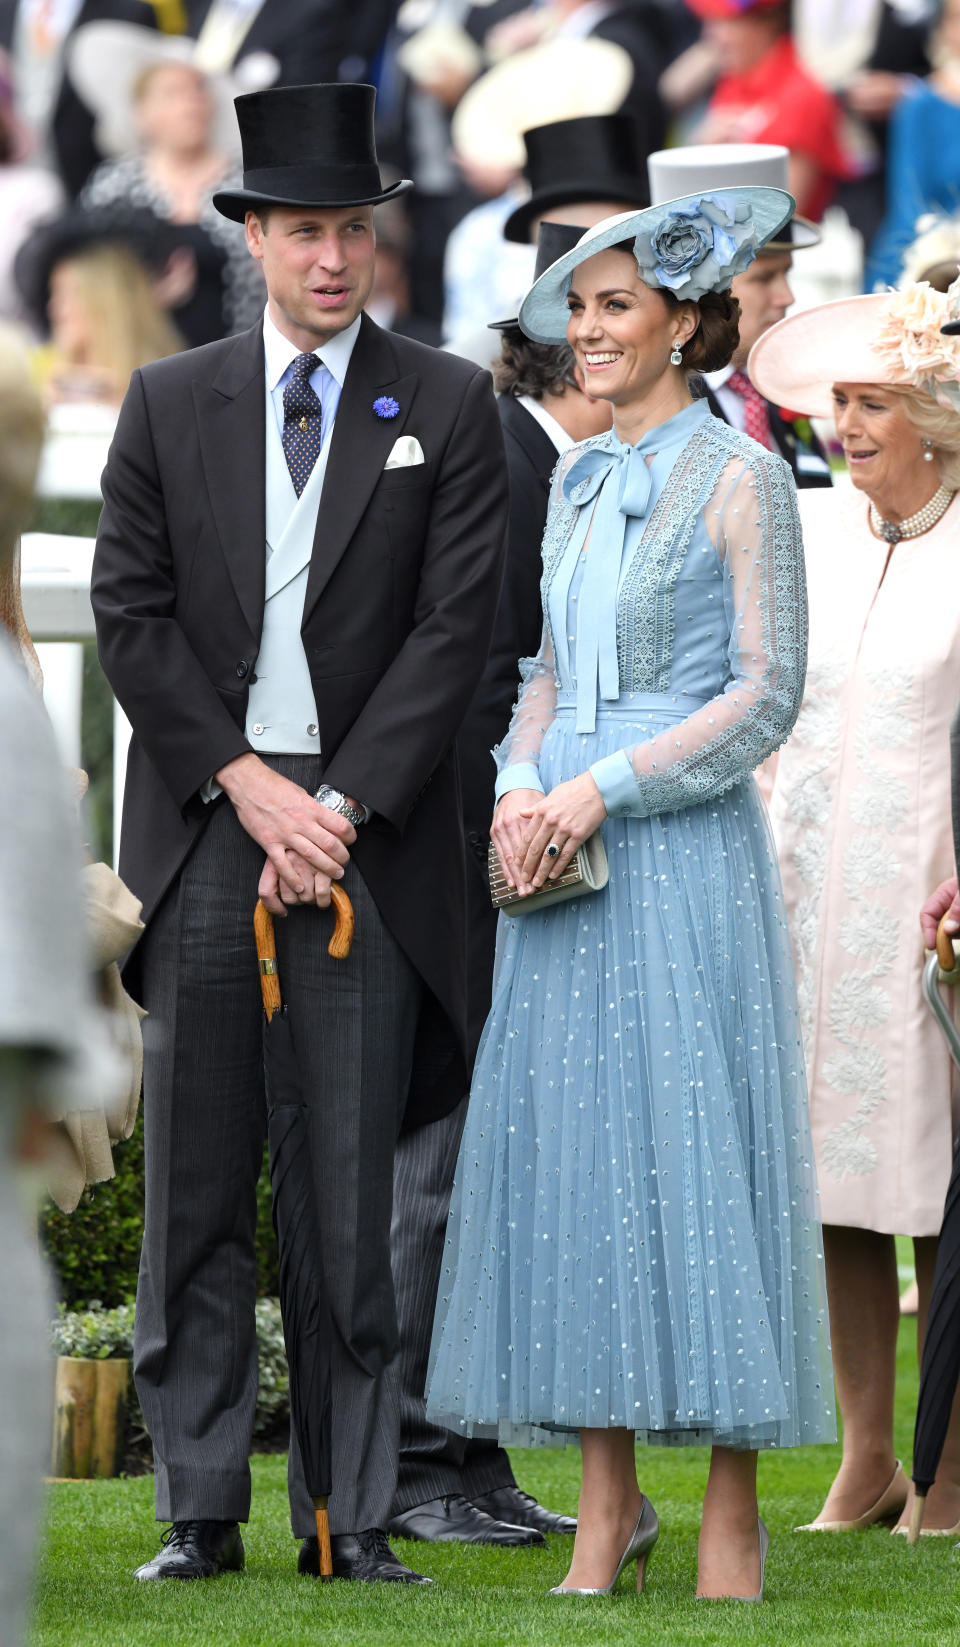 The couple co-ordinated beautifully for the occasion with Kate in a duck egg blue lace Elie Saab skirt and blouse combo and William in a duck egg blue waistcoat. <em>[Photo: Getty]</em>